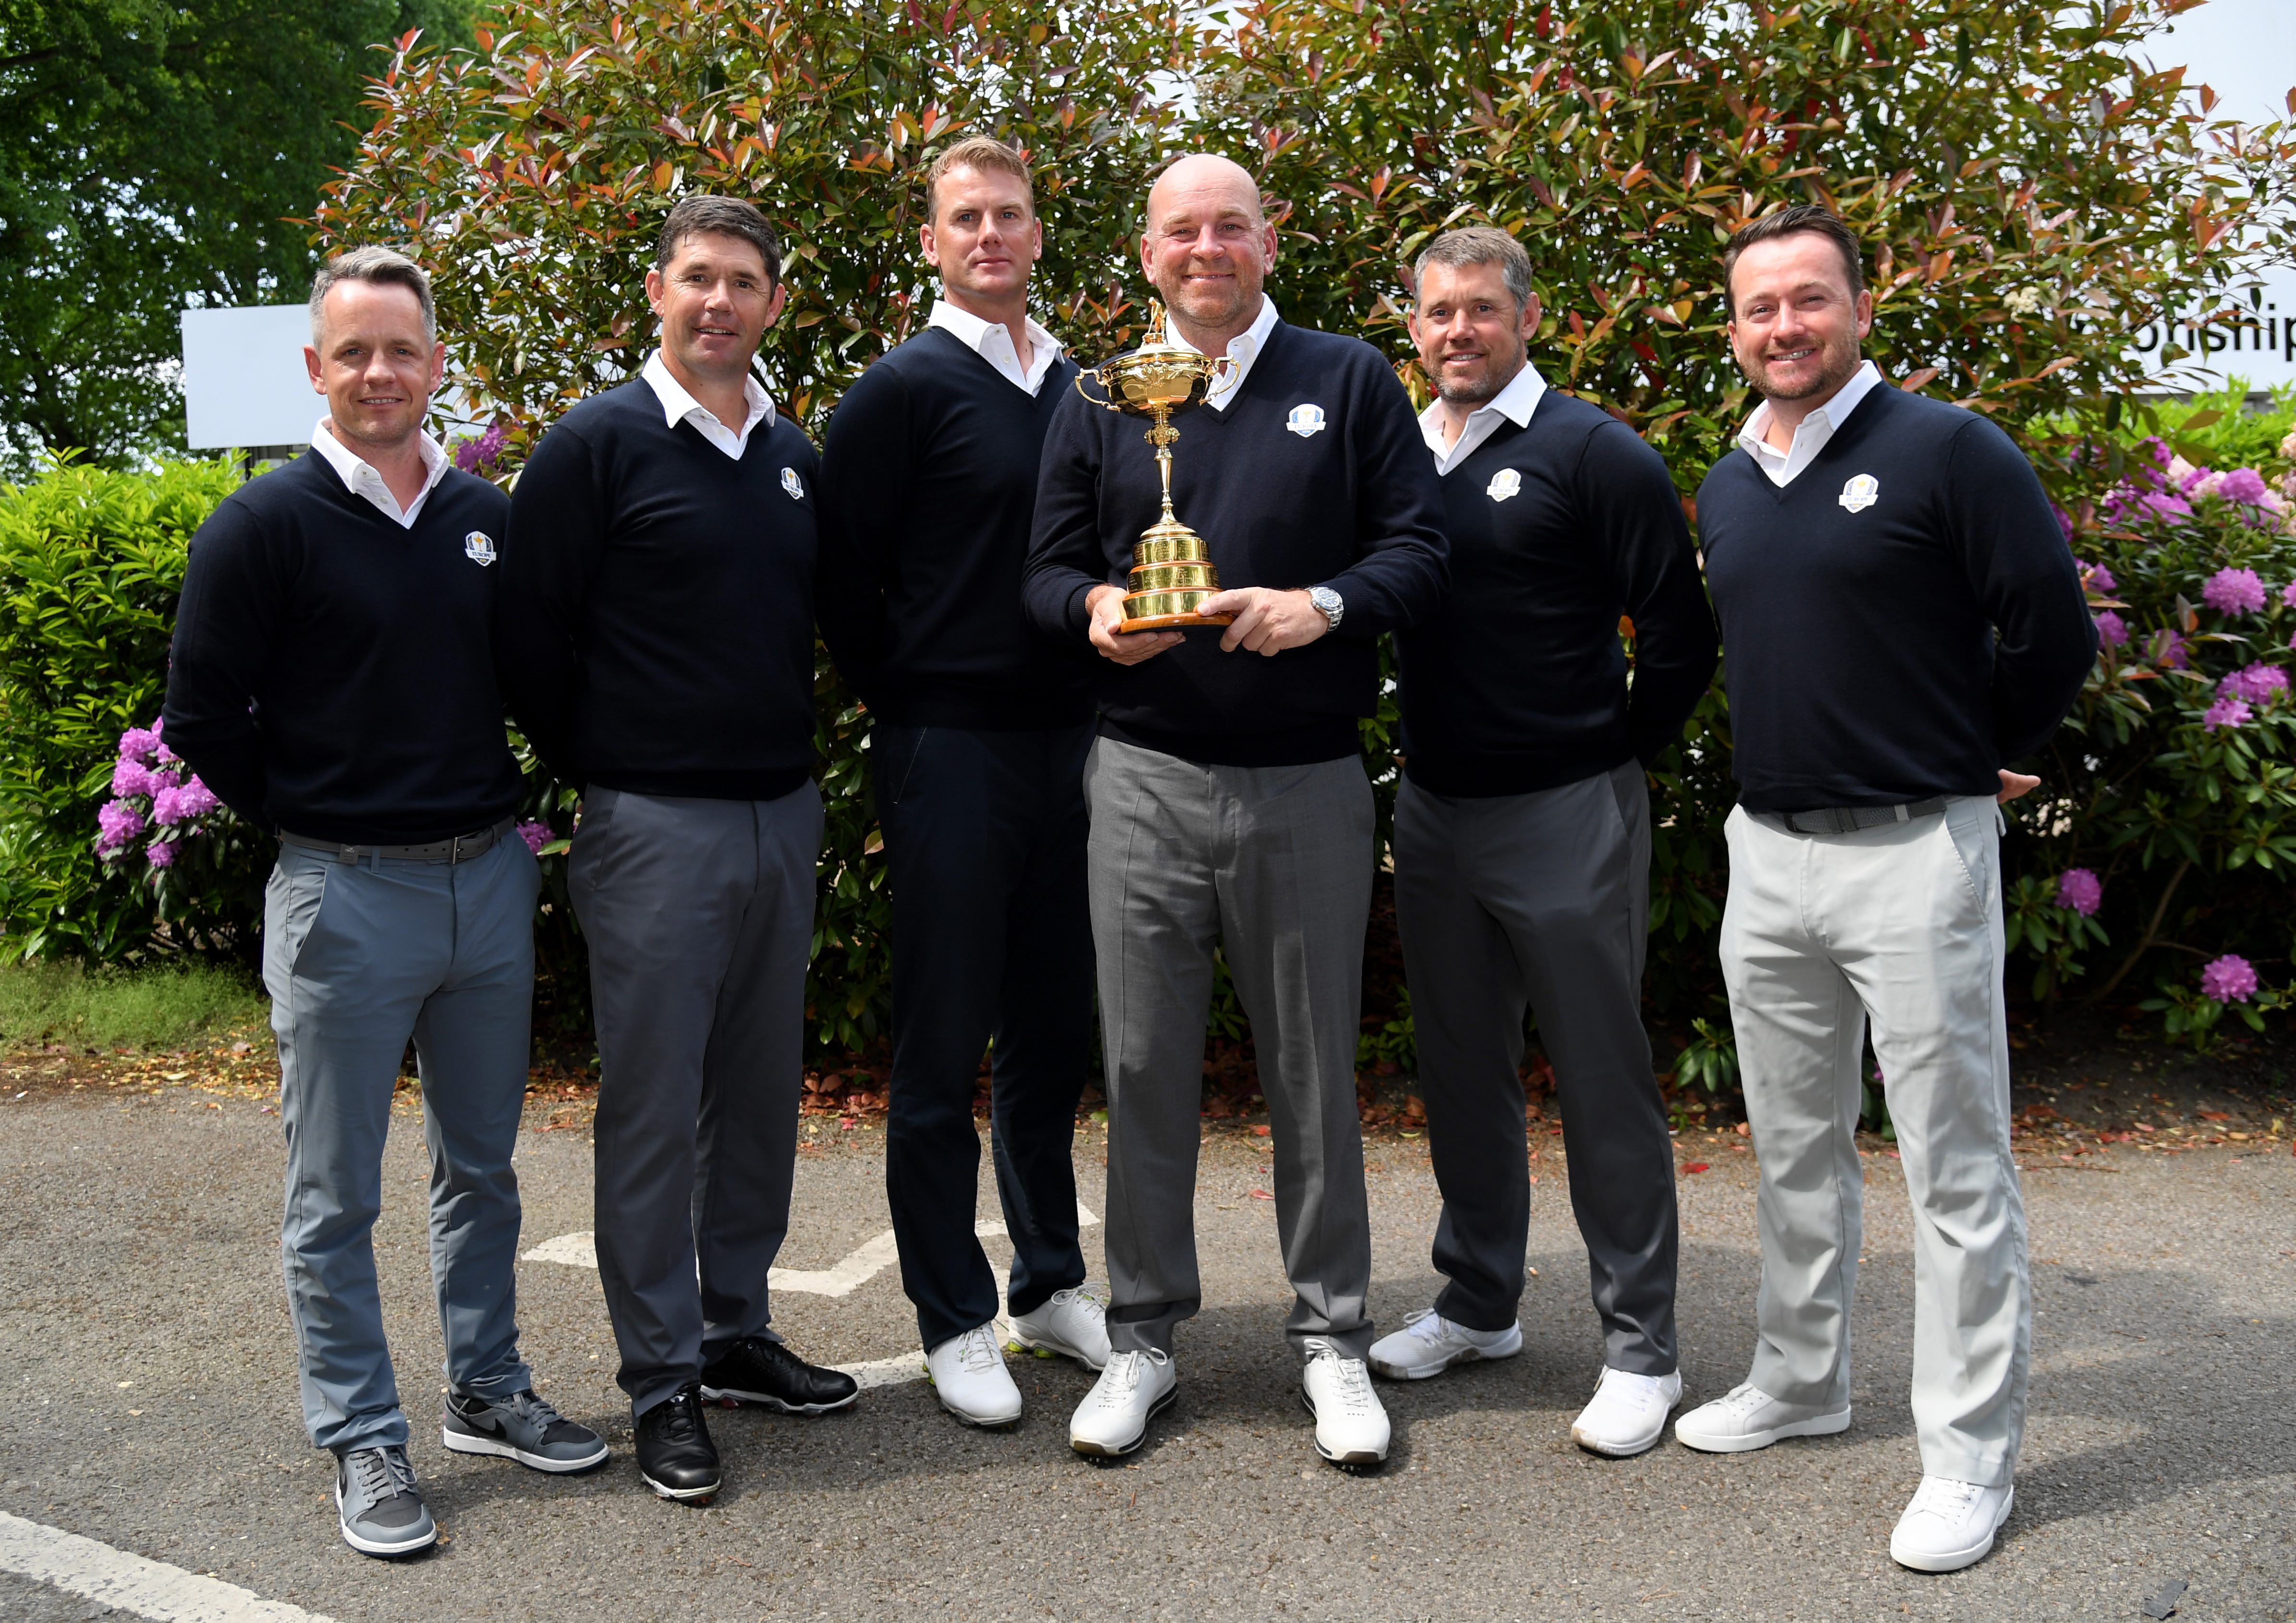 Ryder Cup vice captains